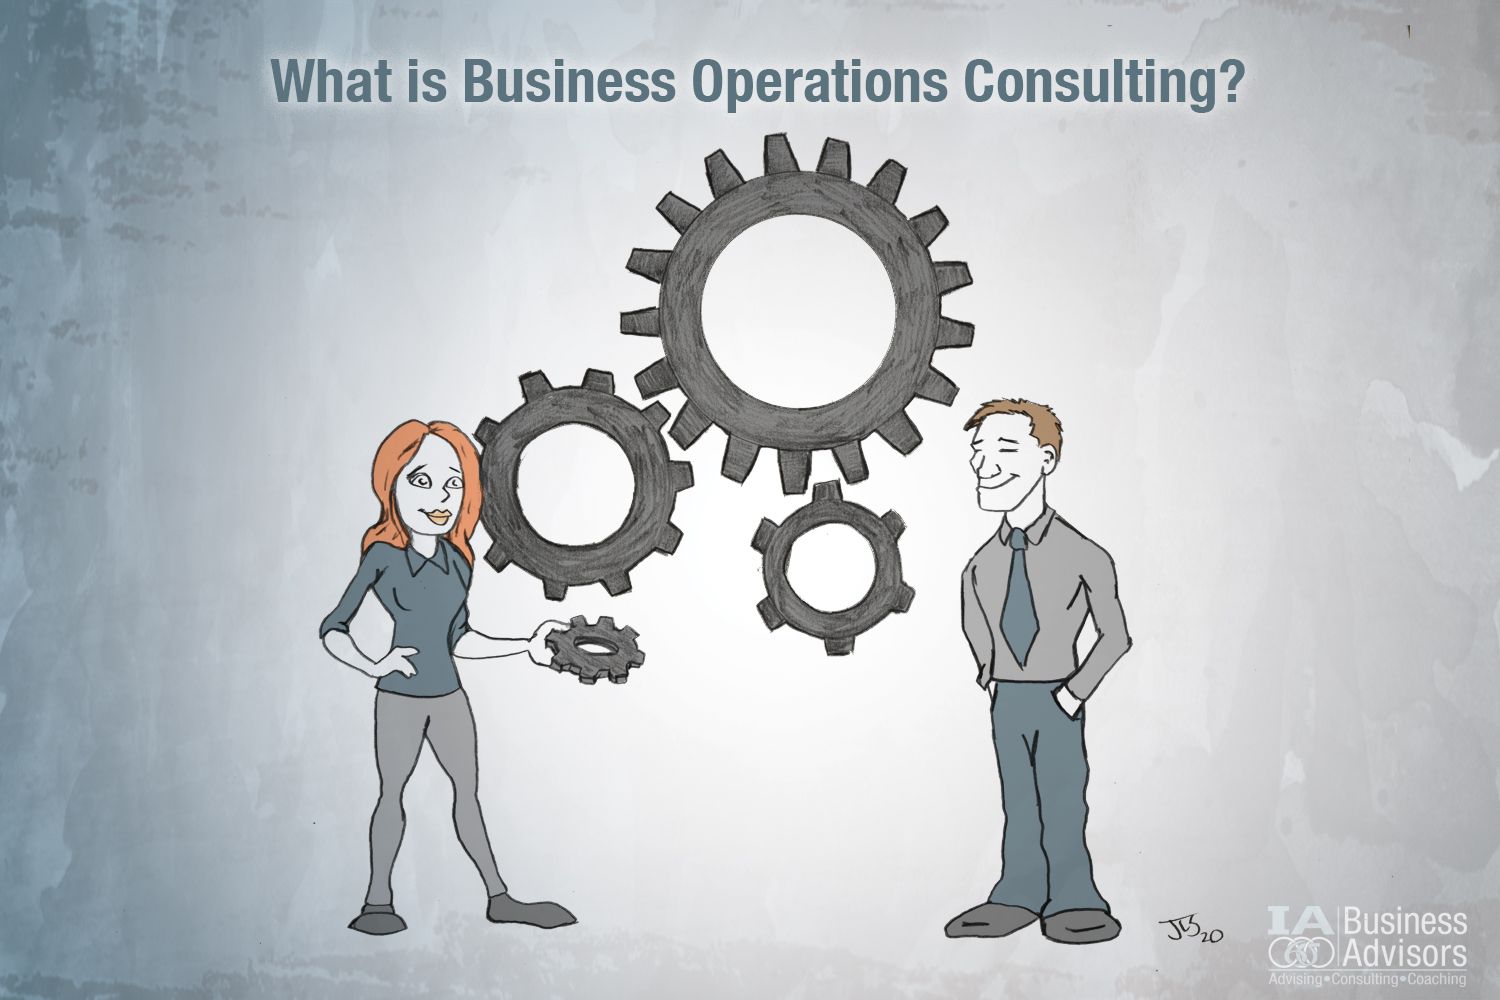 What is Business Operations Consulting?